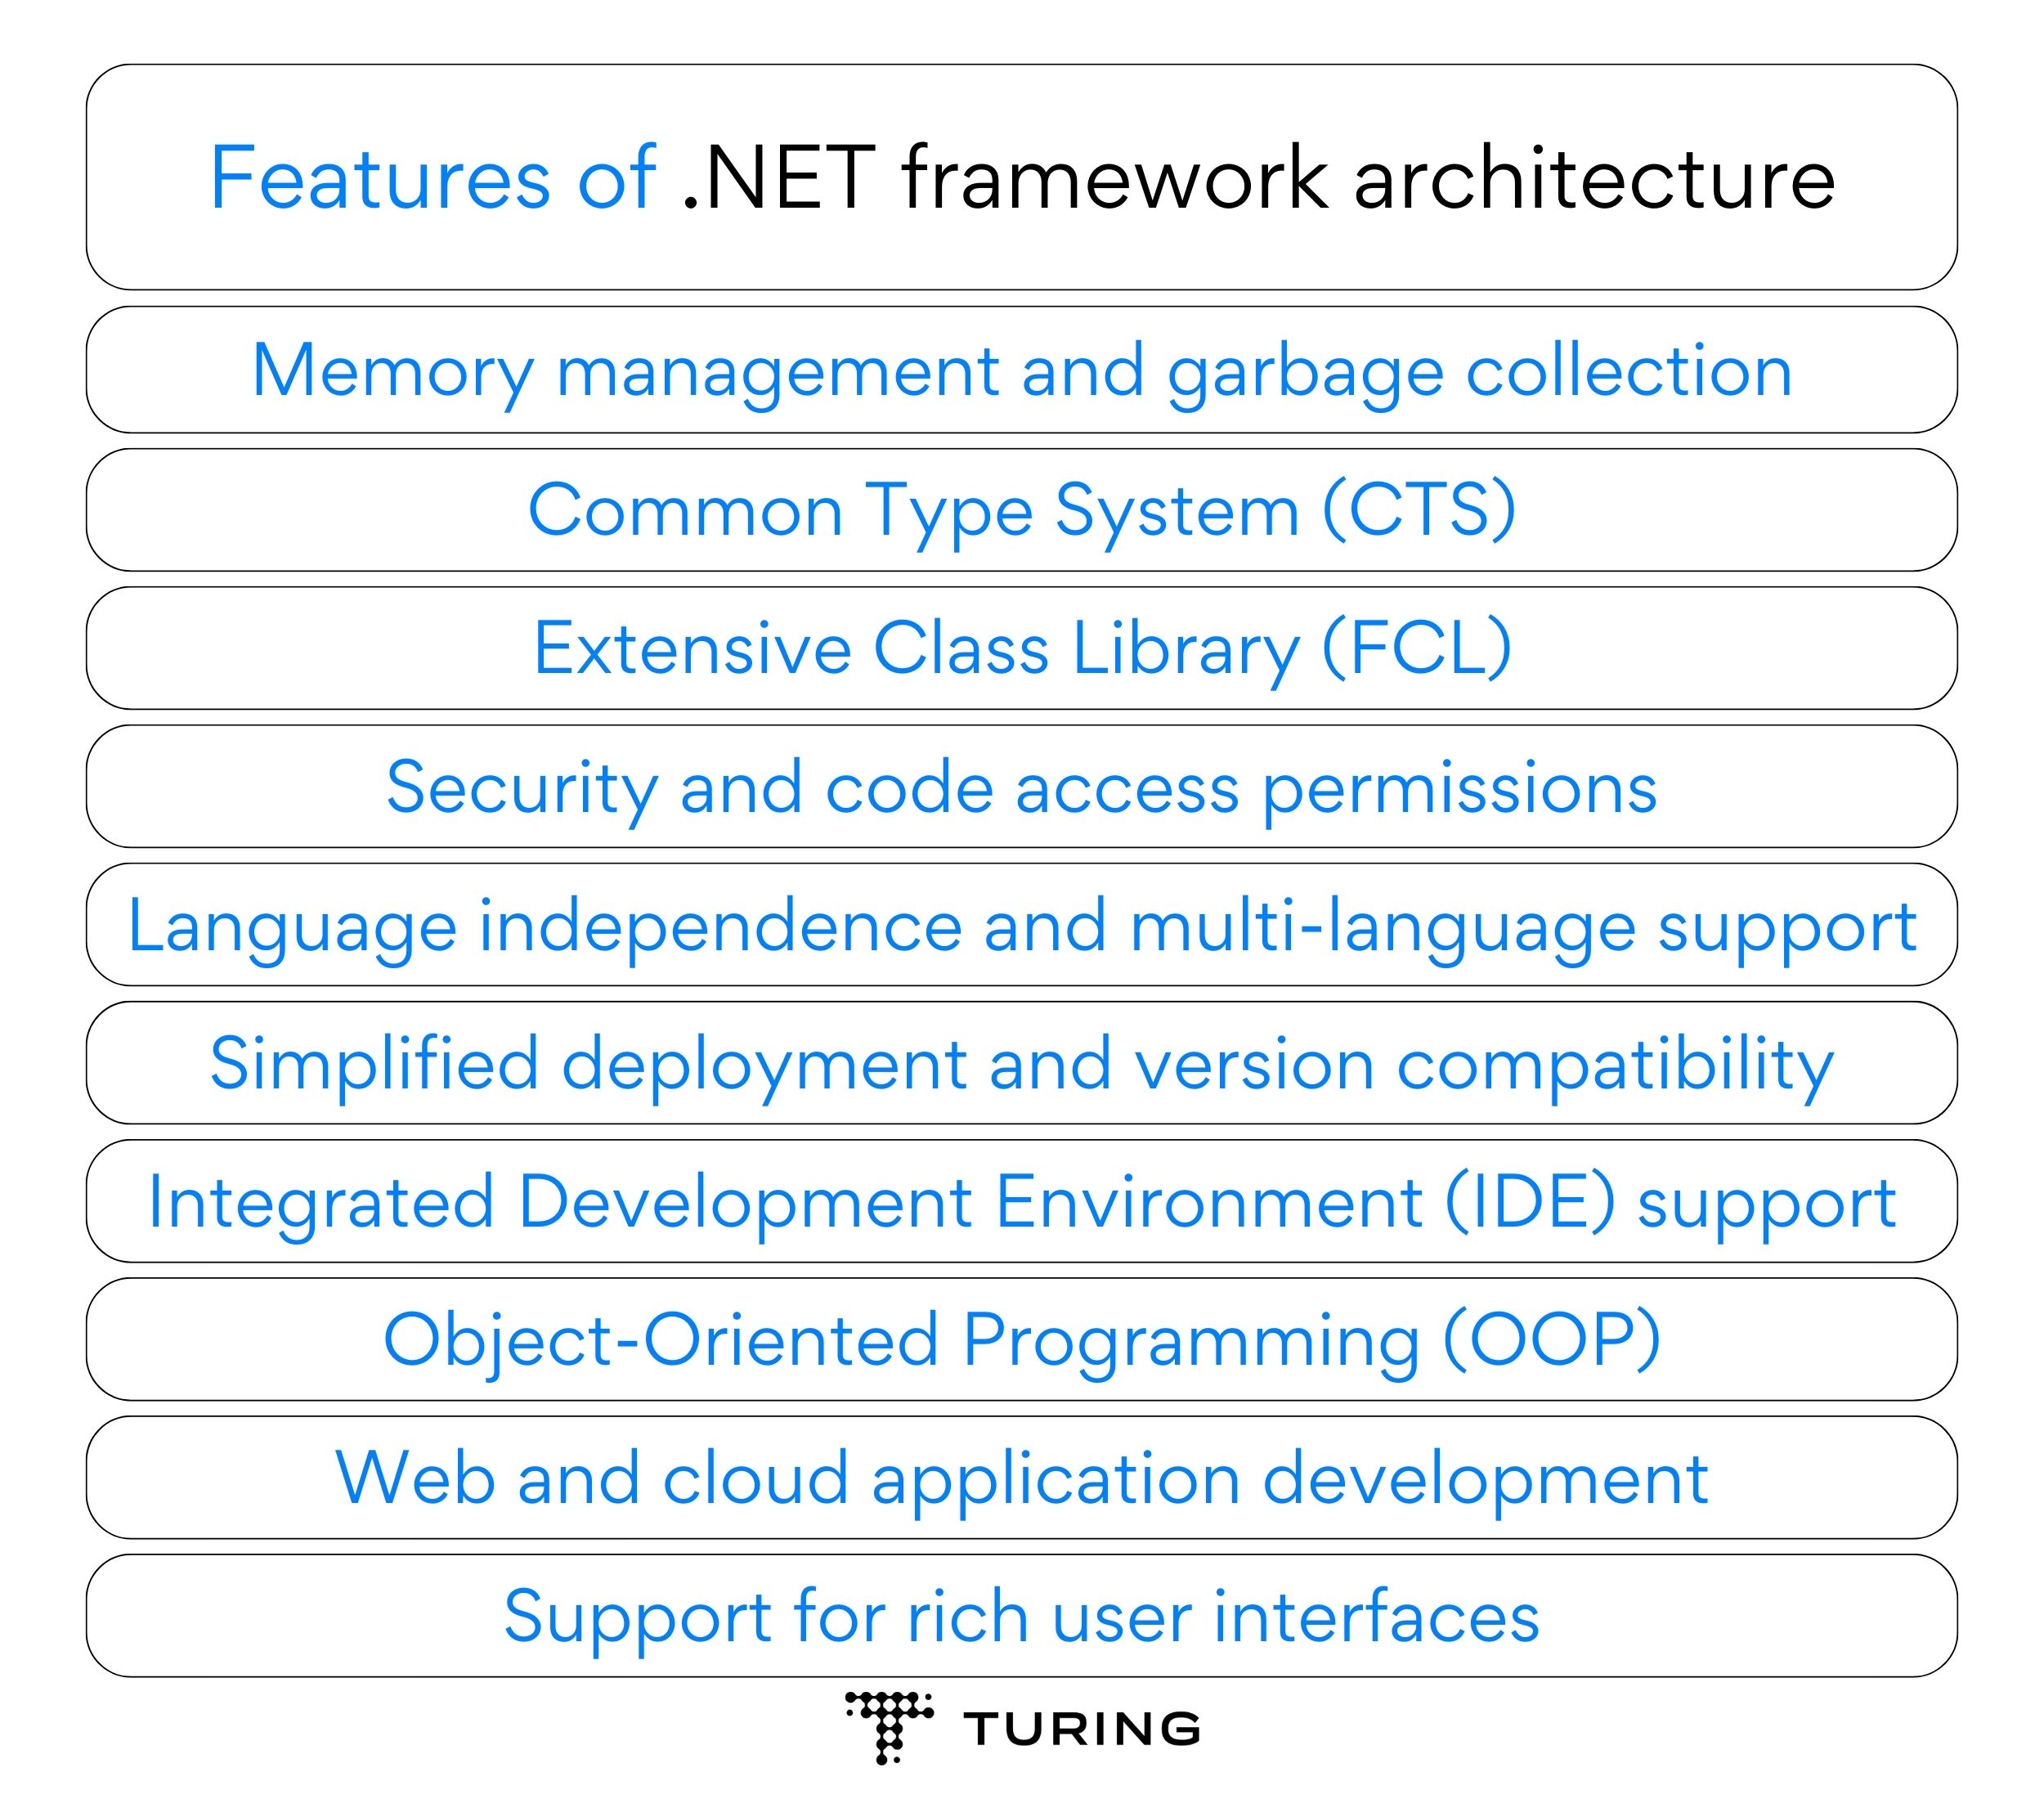 Features of .NET framework architecture